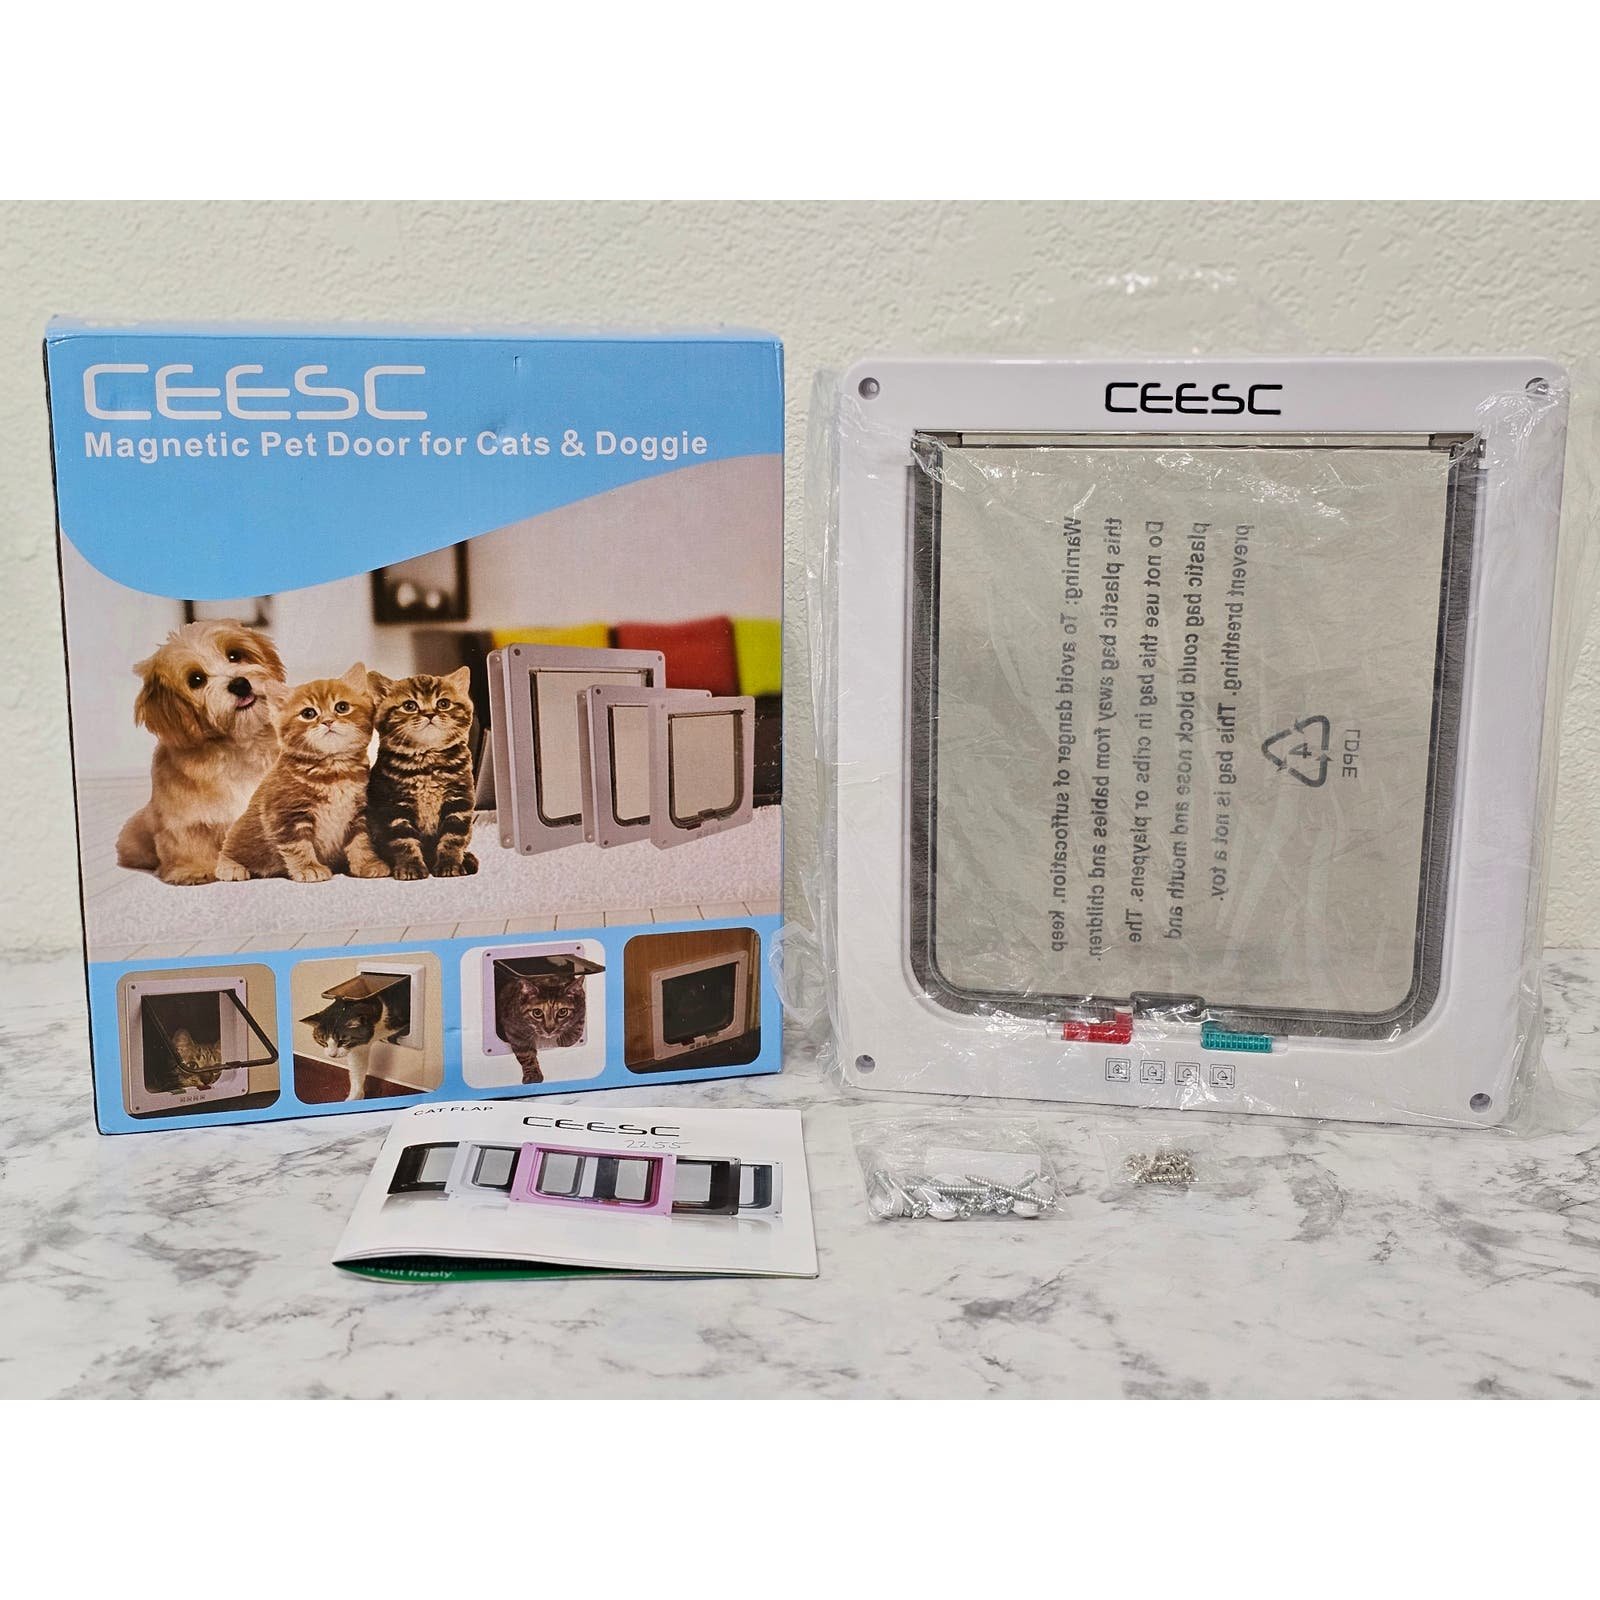 CEESC Magnetic Pet Door Dogs Cats XL White 9.8x2.2x11 inch w Hardware & Booklet Cvt3eeMms